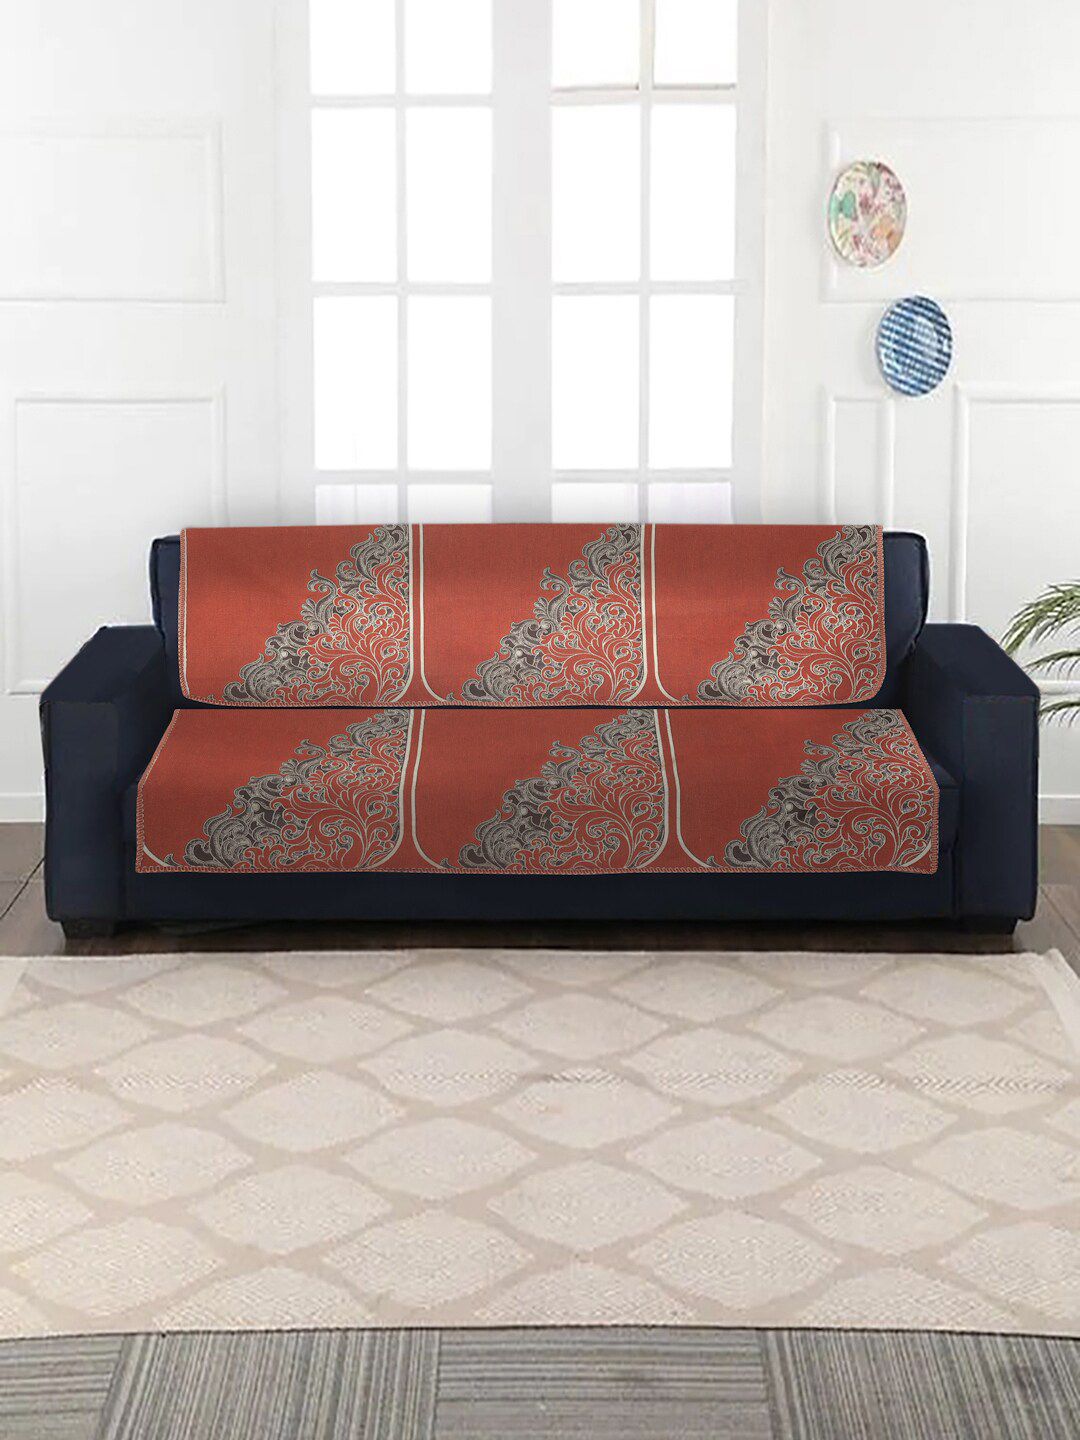 MULTITEX Grey & Rust-Colored 6 Pieces Printed Sofa Covers Price in India